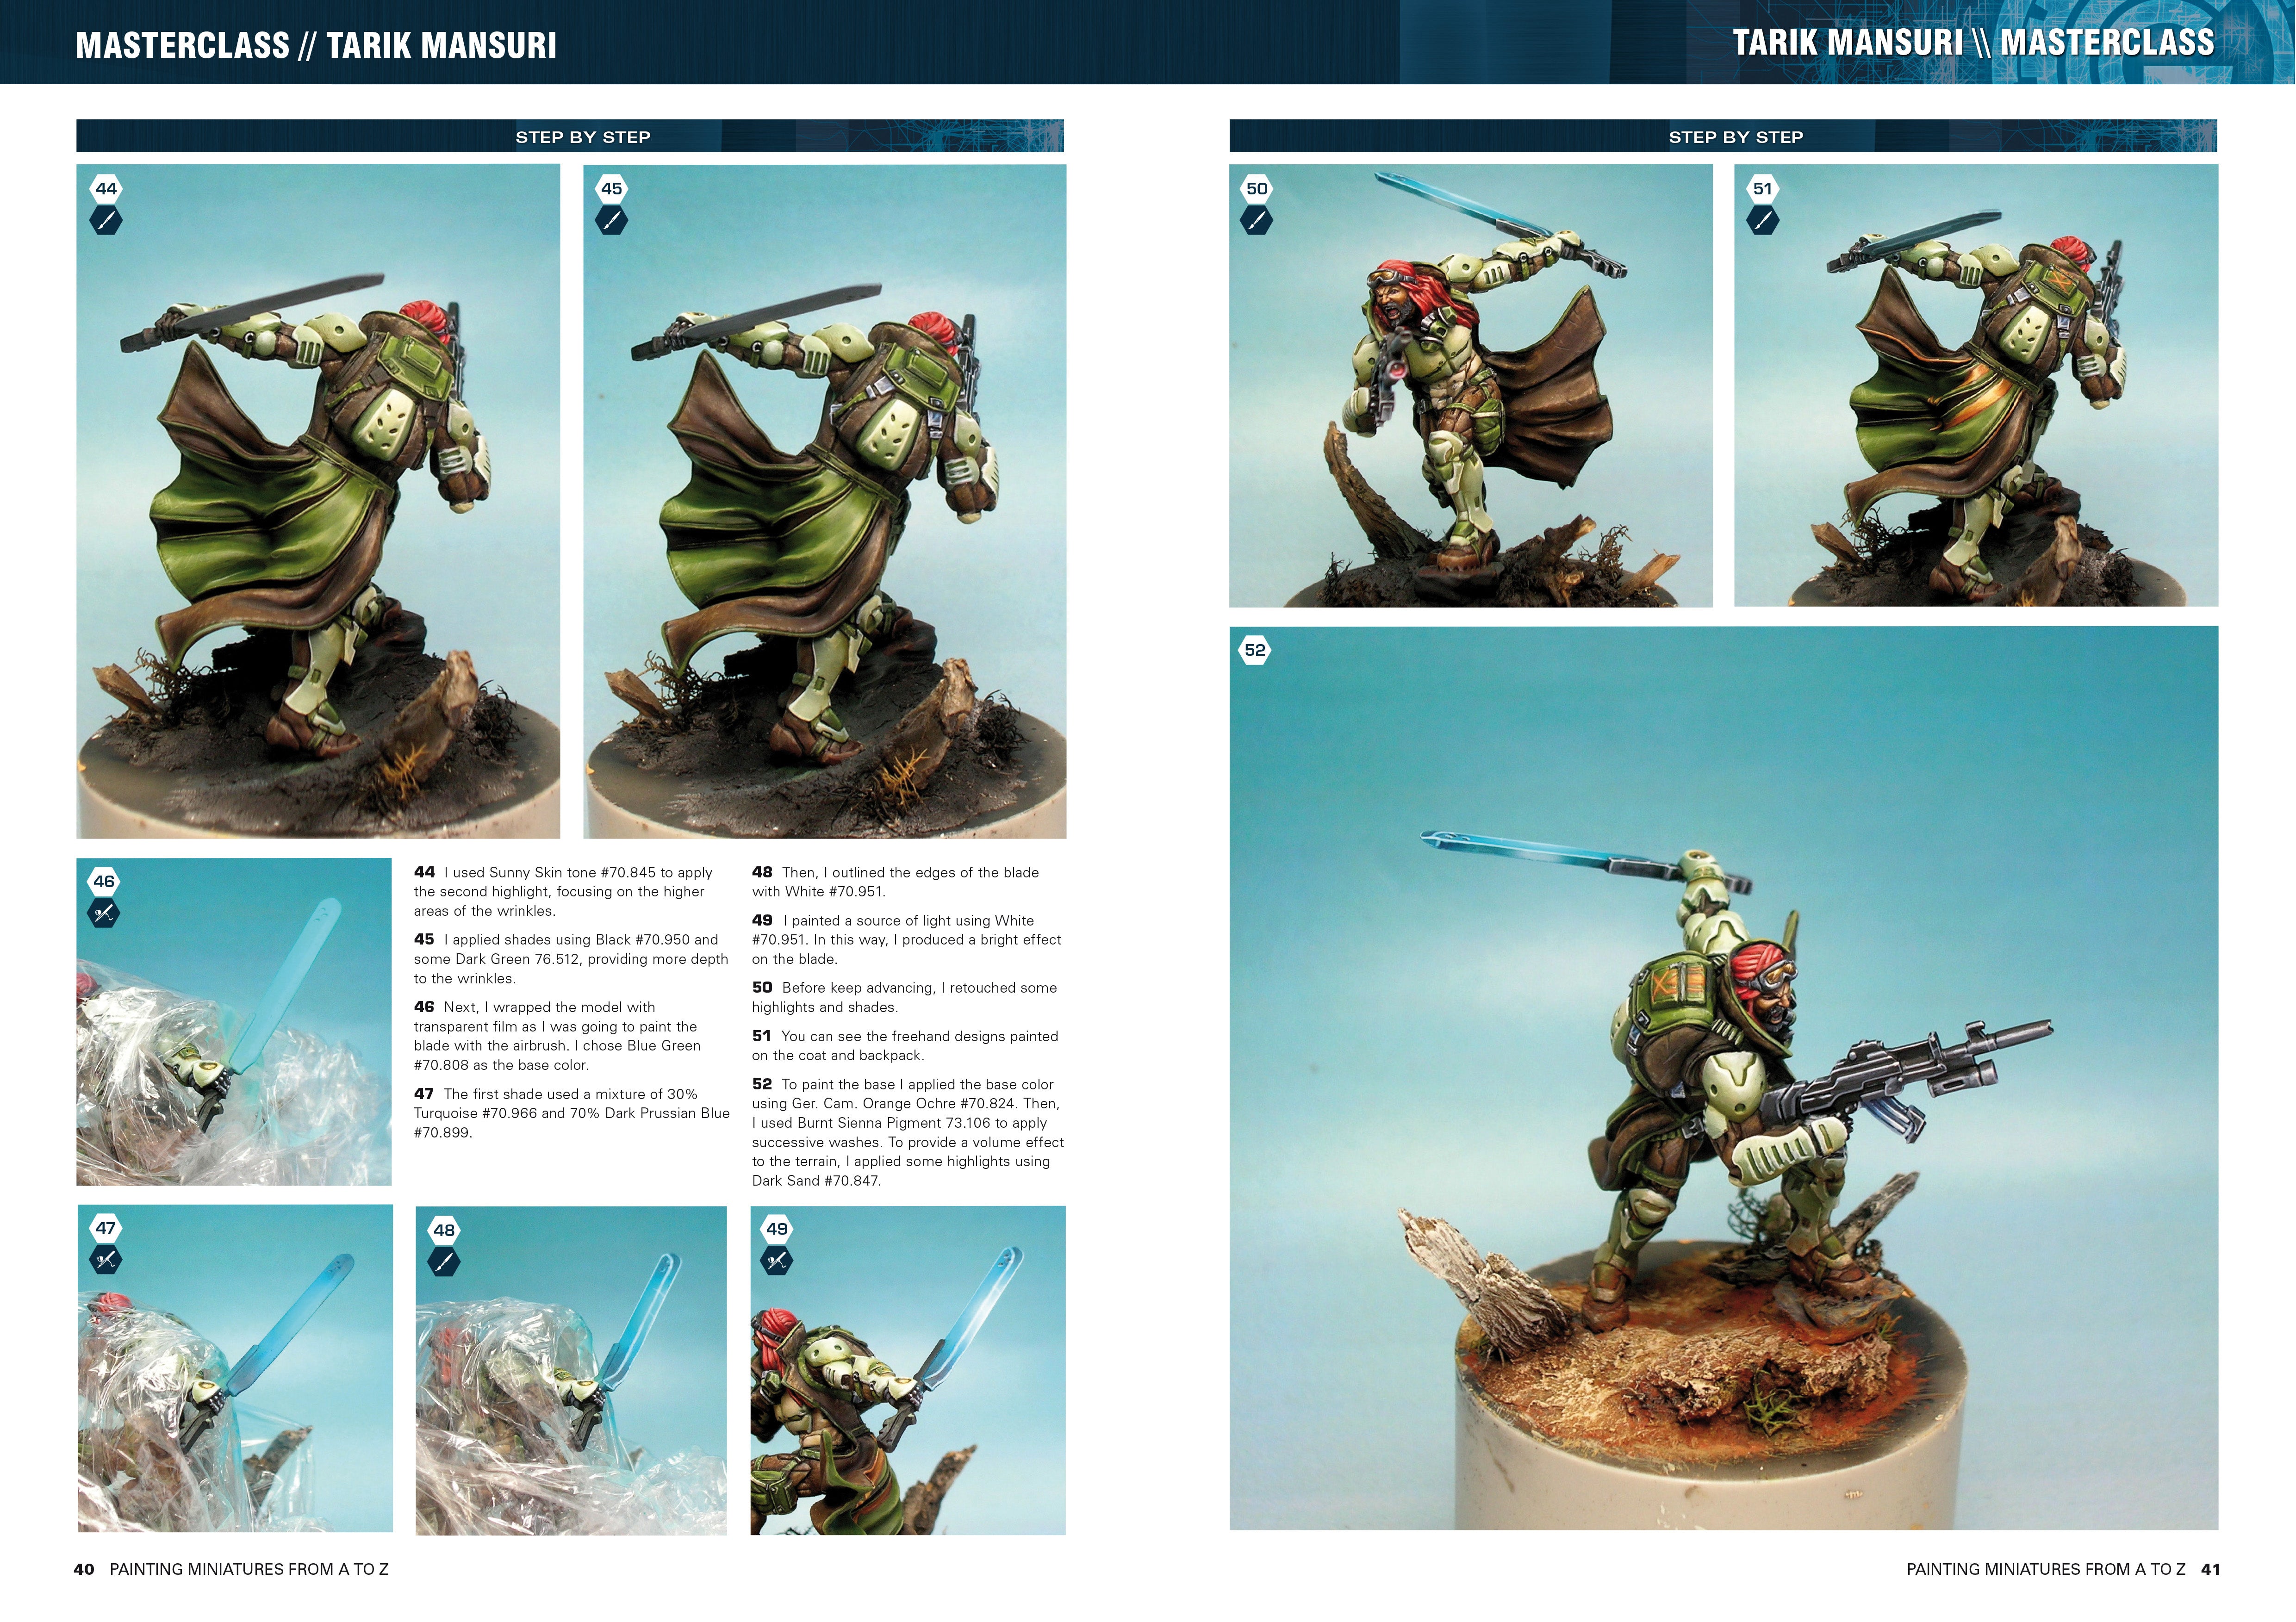 75.003 - Painting Miniatures From A - Z by Angel Giraldez - Masterclass Vol 1